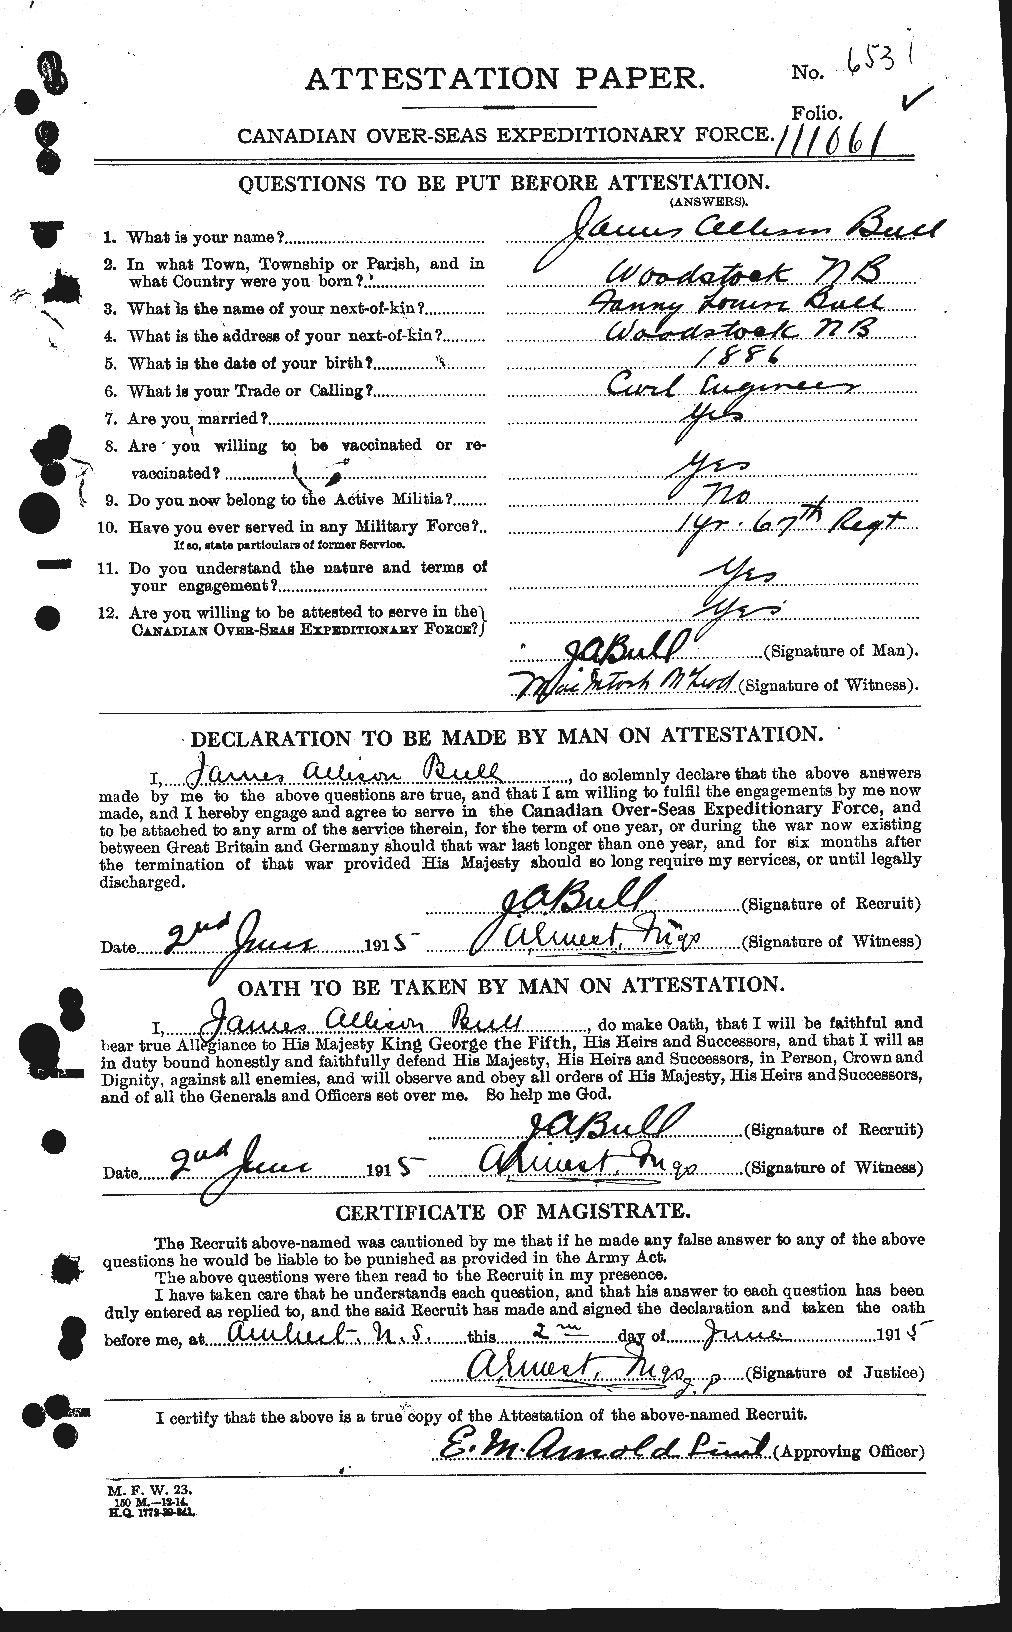 Personnel Records of the First World War - CEF 273416a